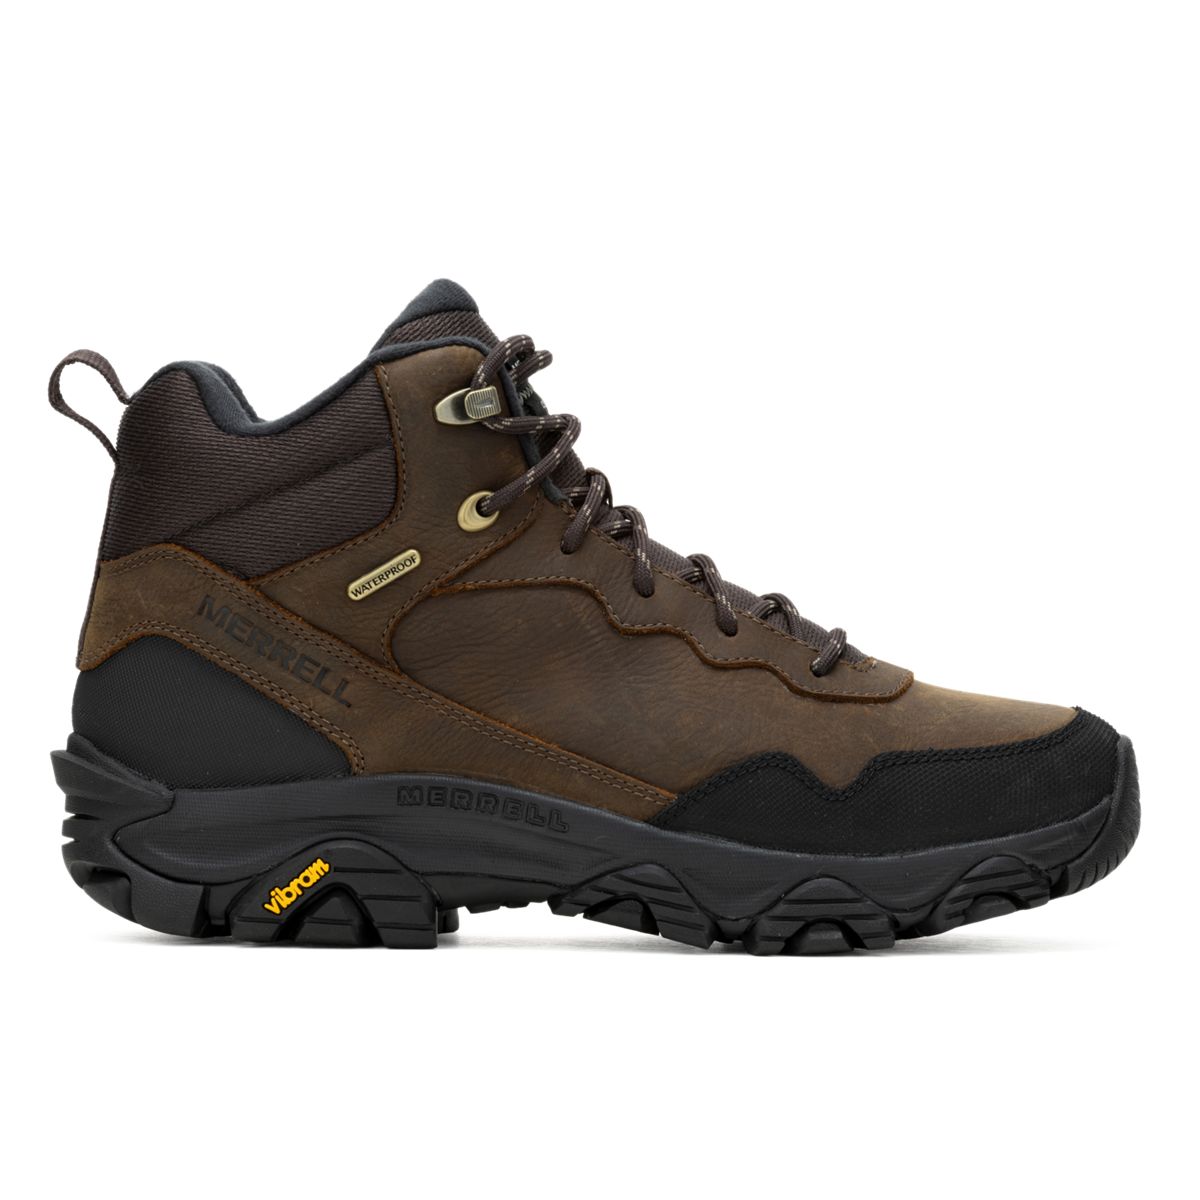 Moab 3 Thermo Mid Waterproof Earth